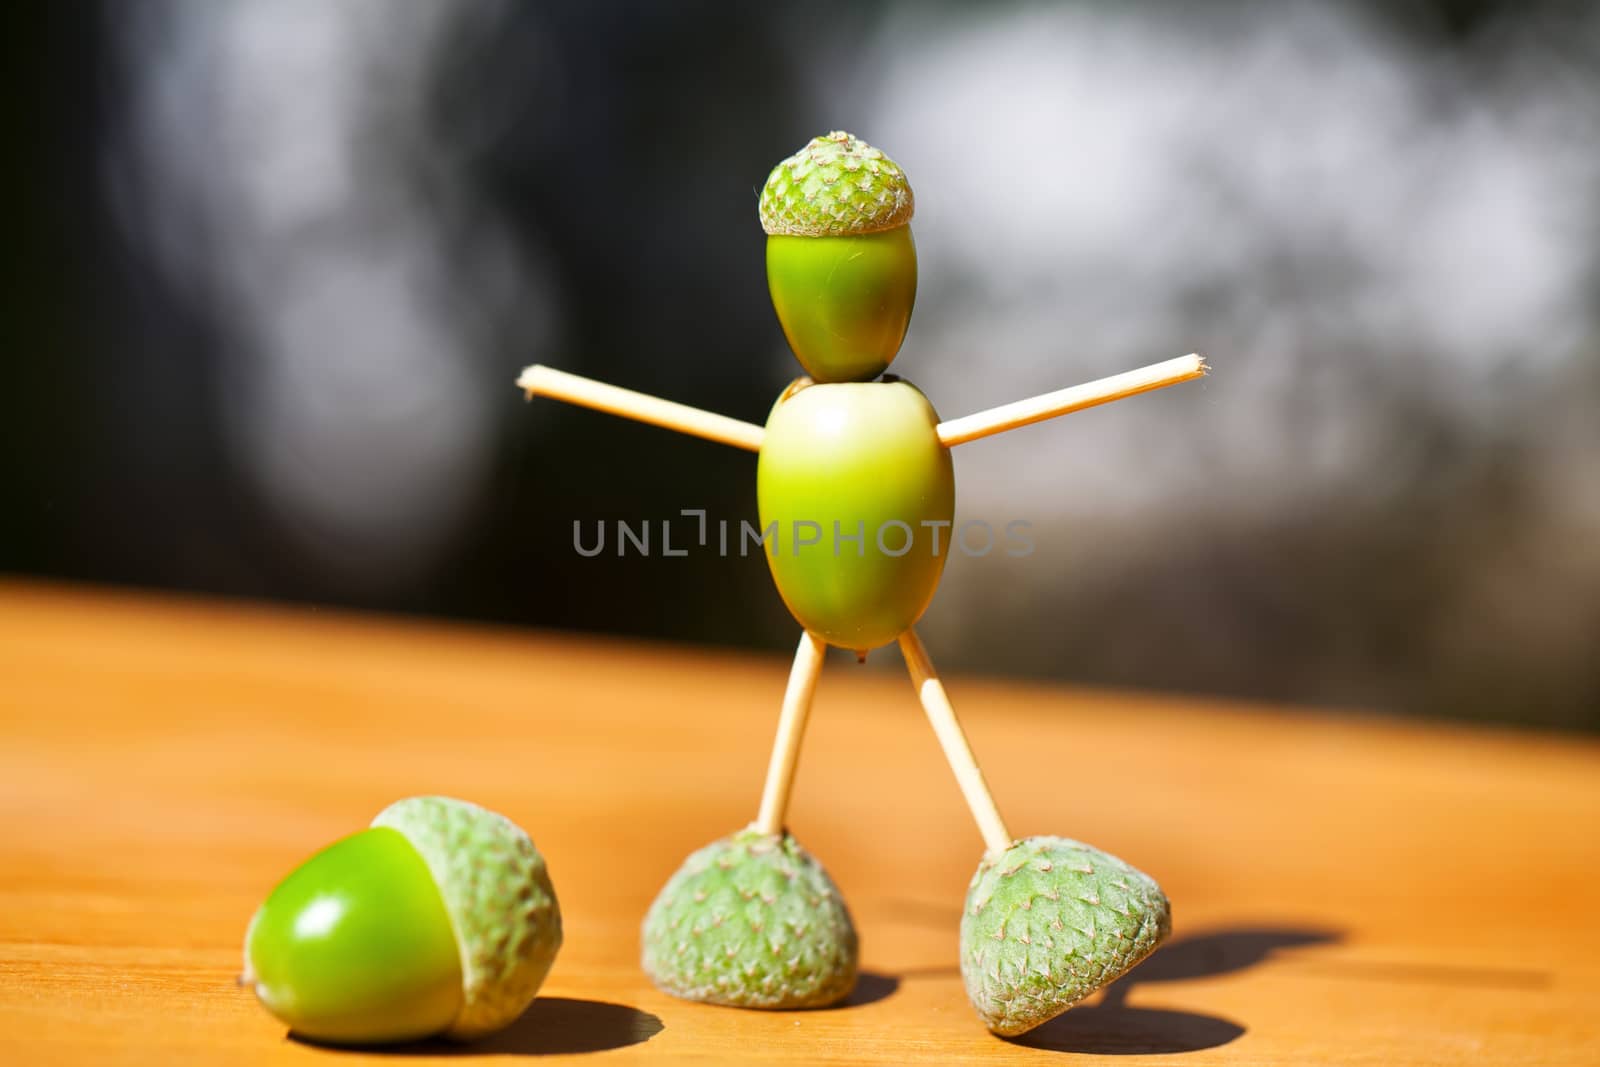 Little man made of green acorns on wood by RawGroup